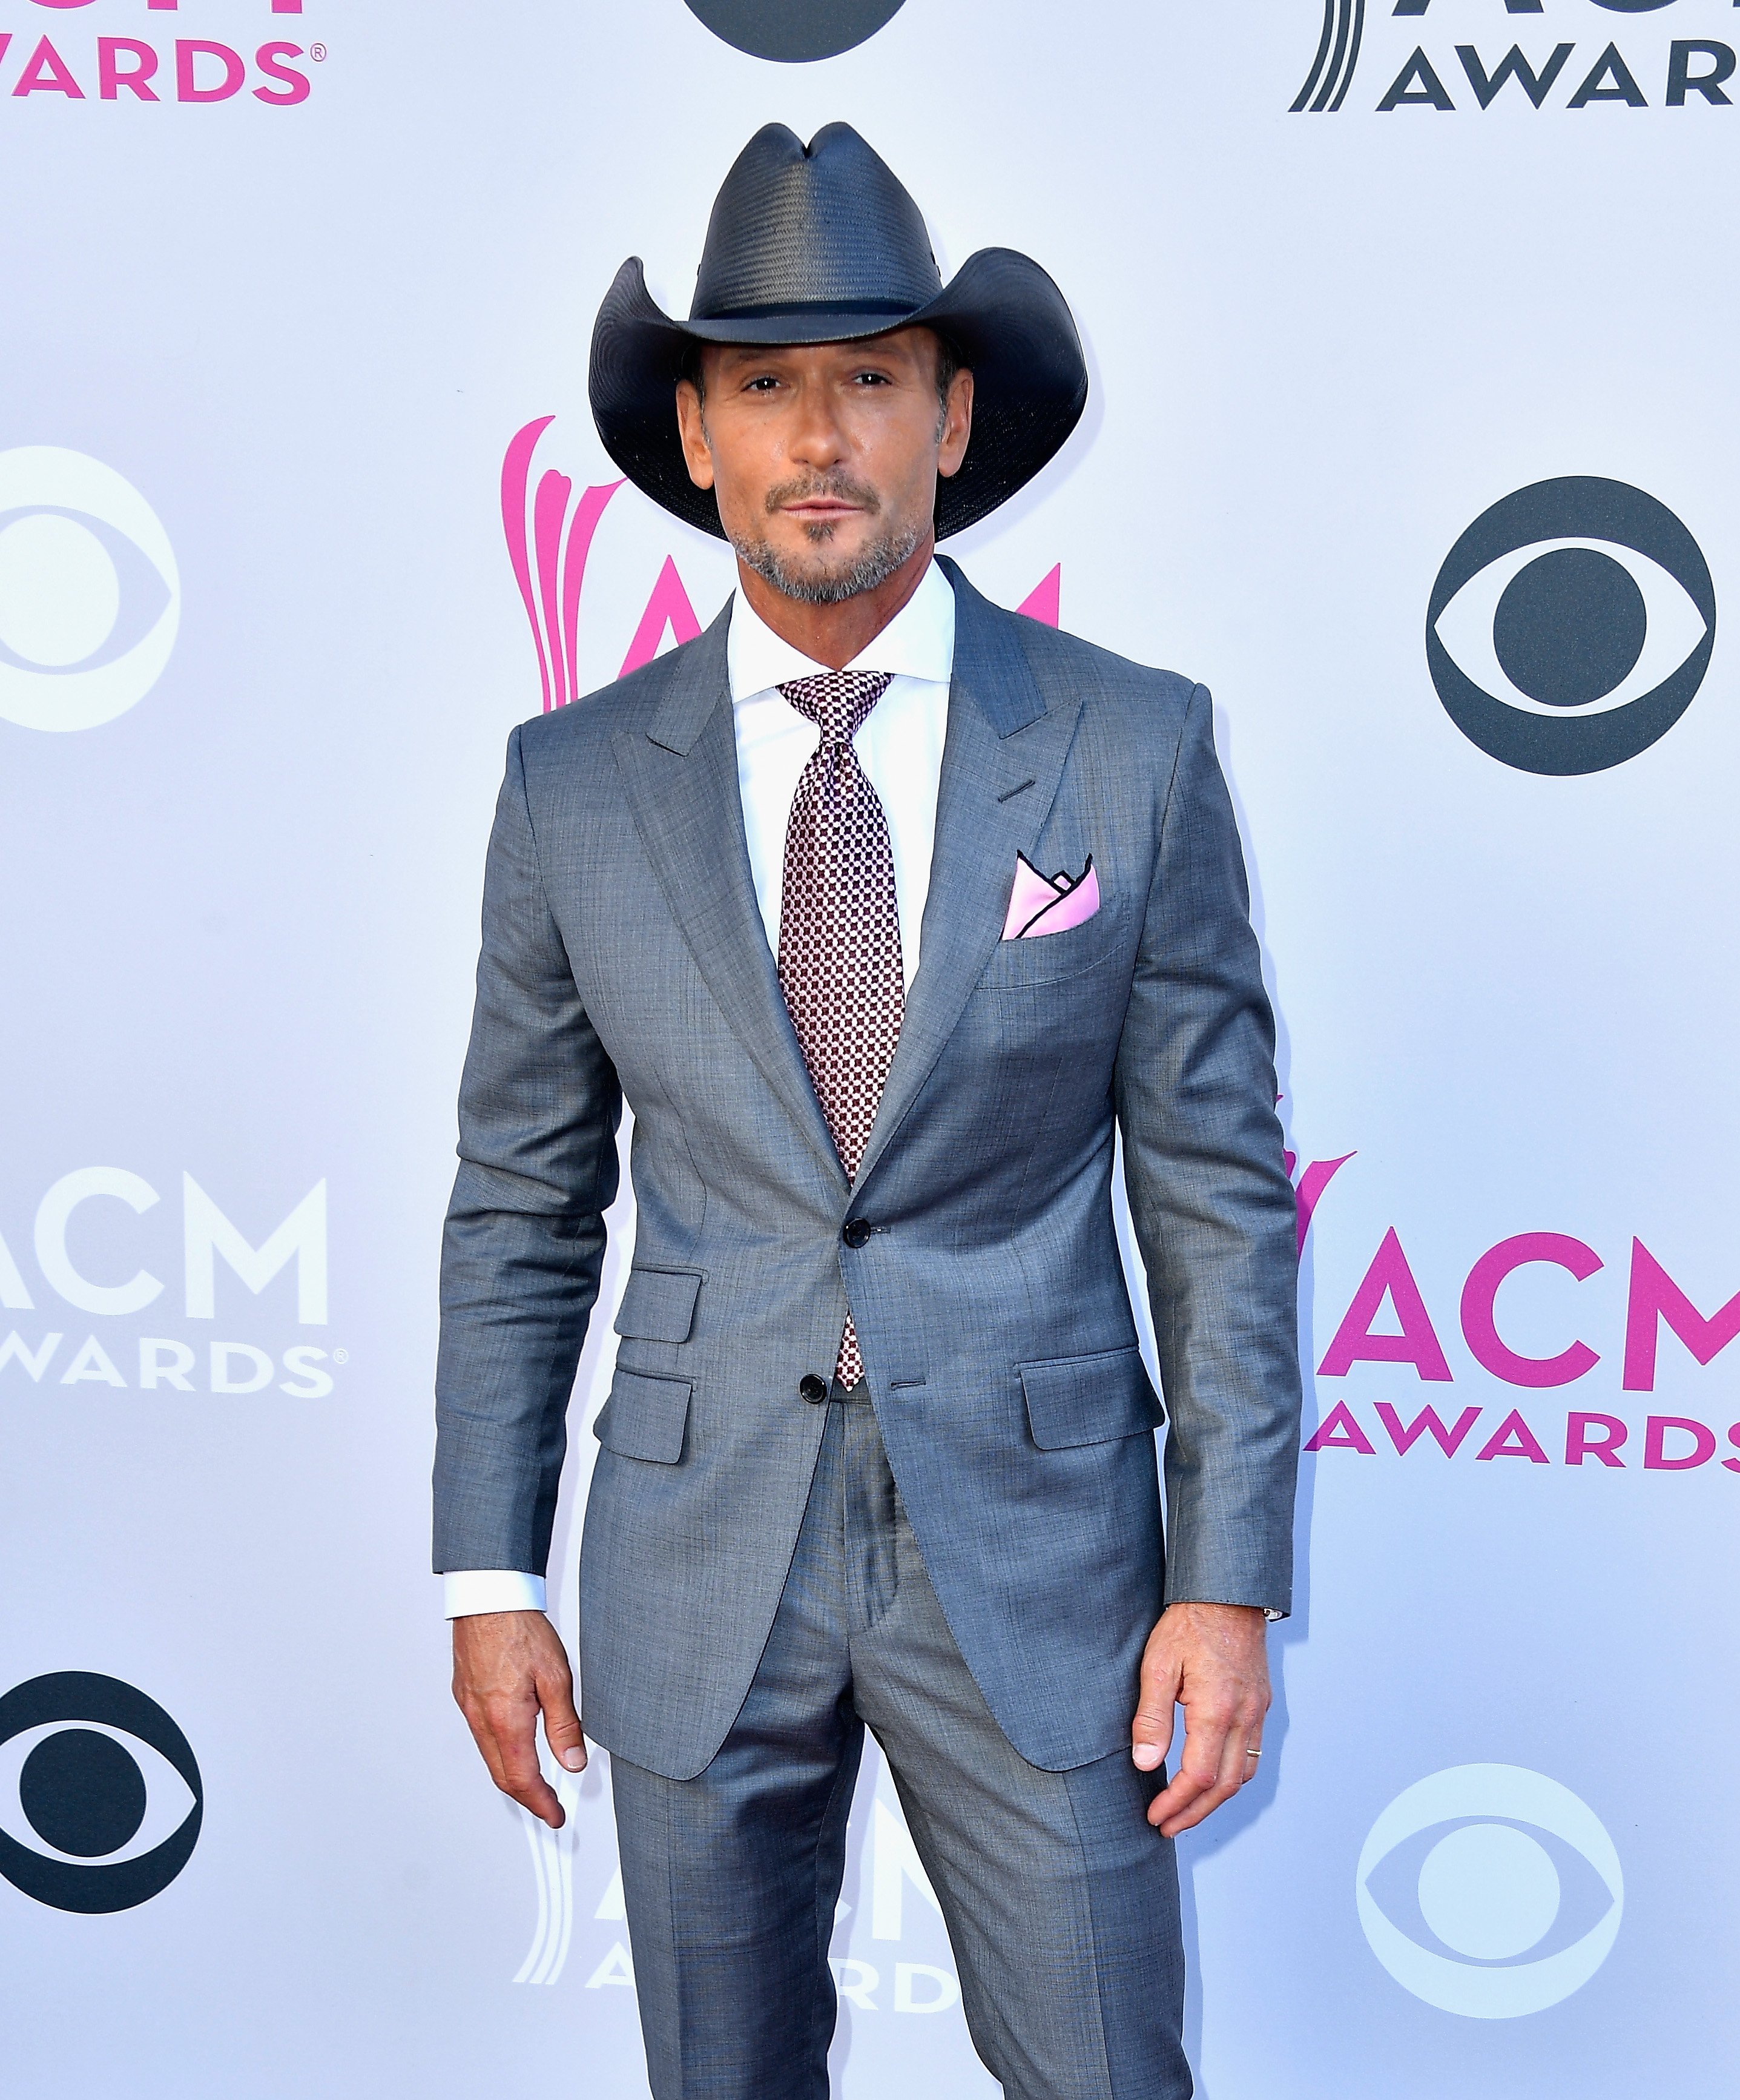 Tim McGraw attends the 52nd Academy Of Country Music Awards on April 2, 2017, in Las Vegas, Nevada. | Source: Getty Images.